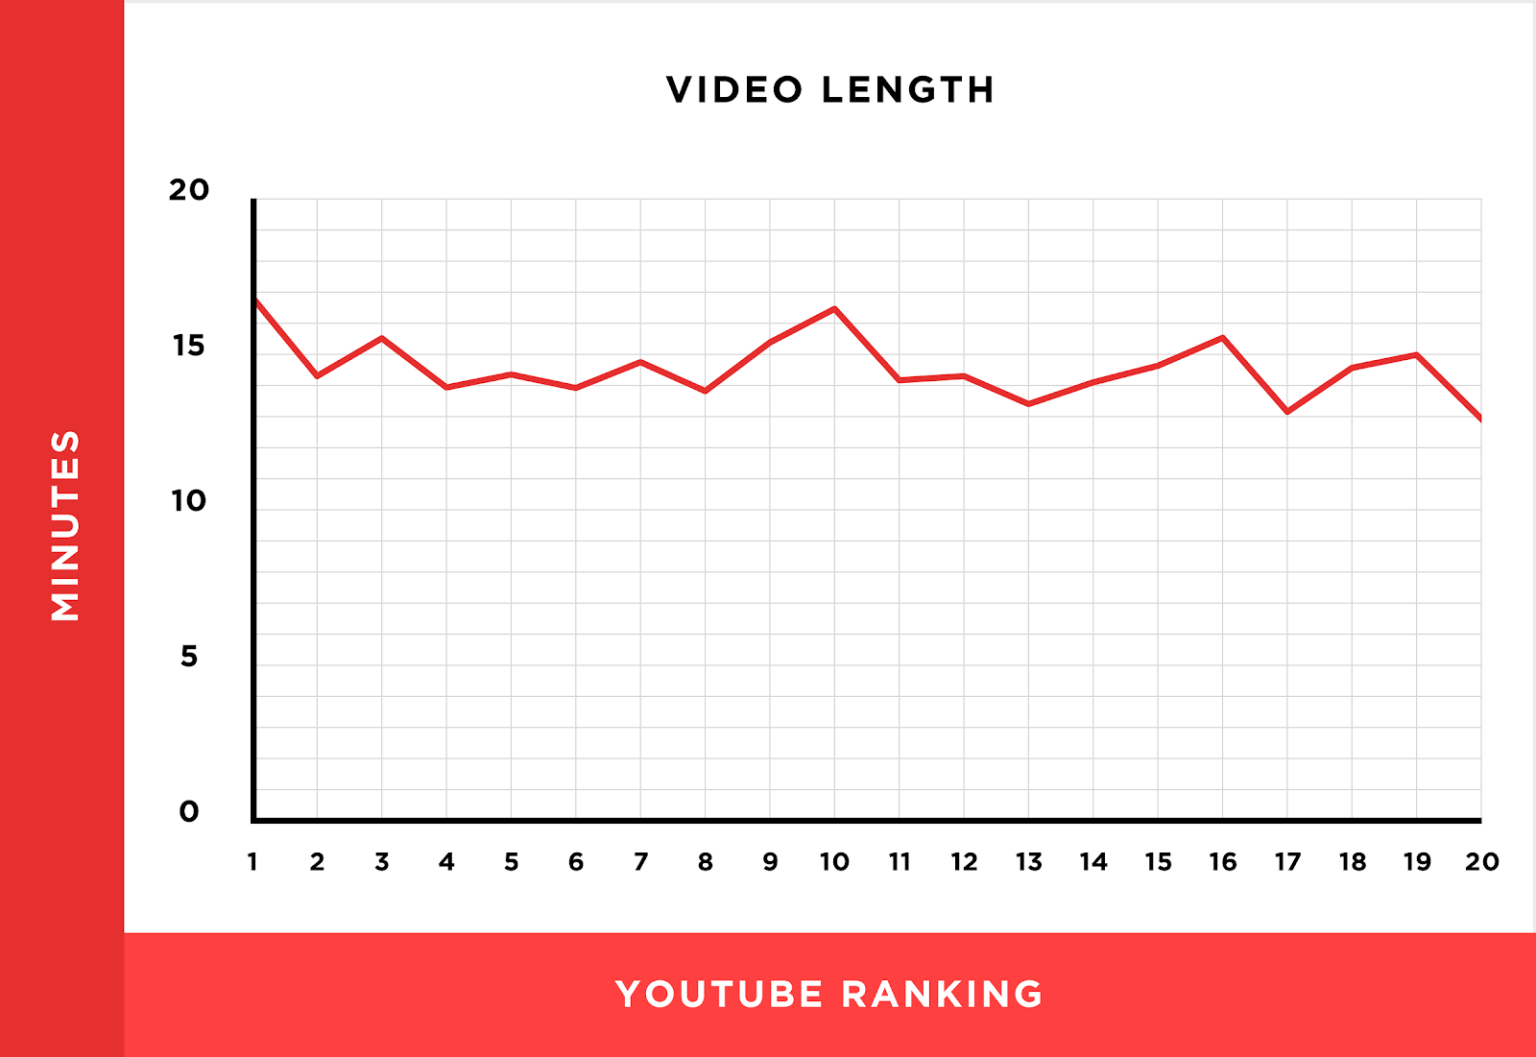 Line graph showing relationship of video length to YouTube ranking